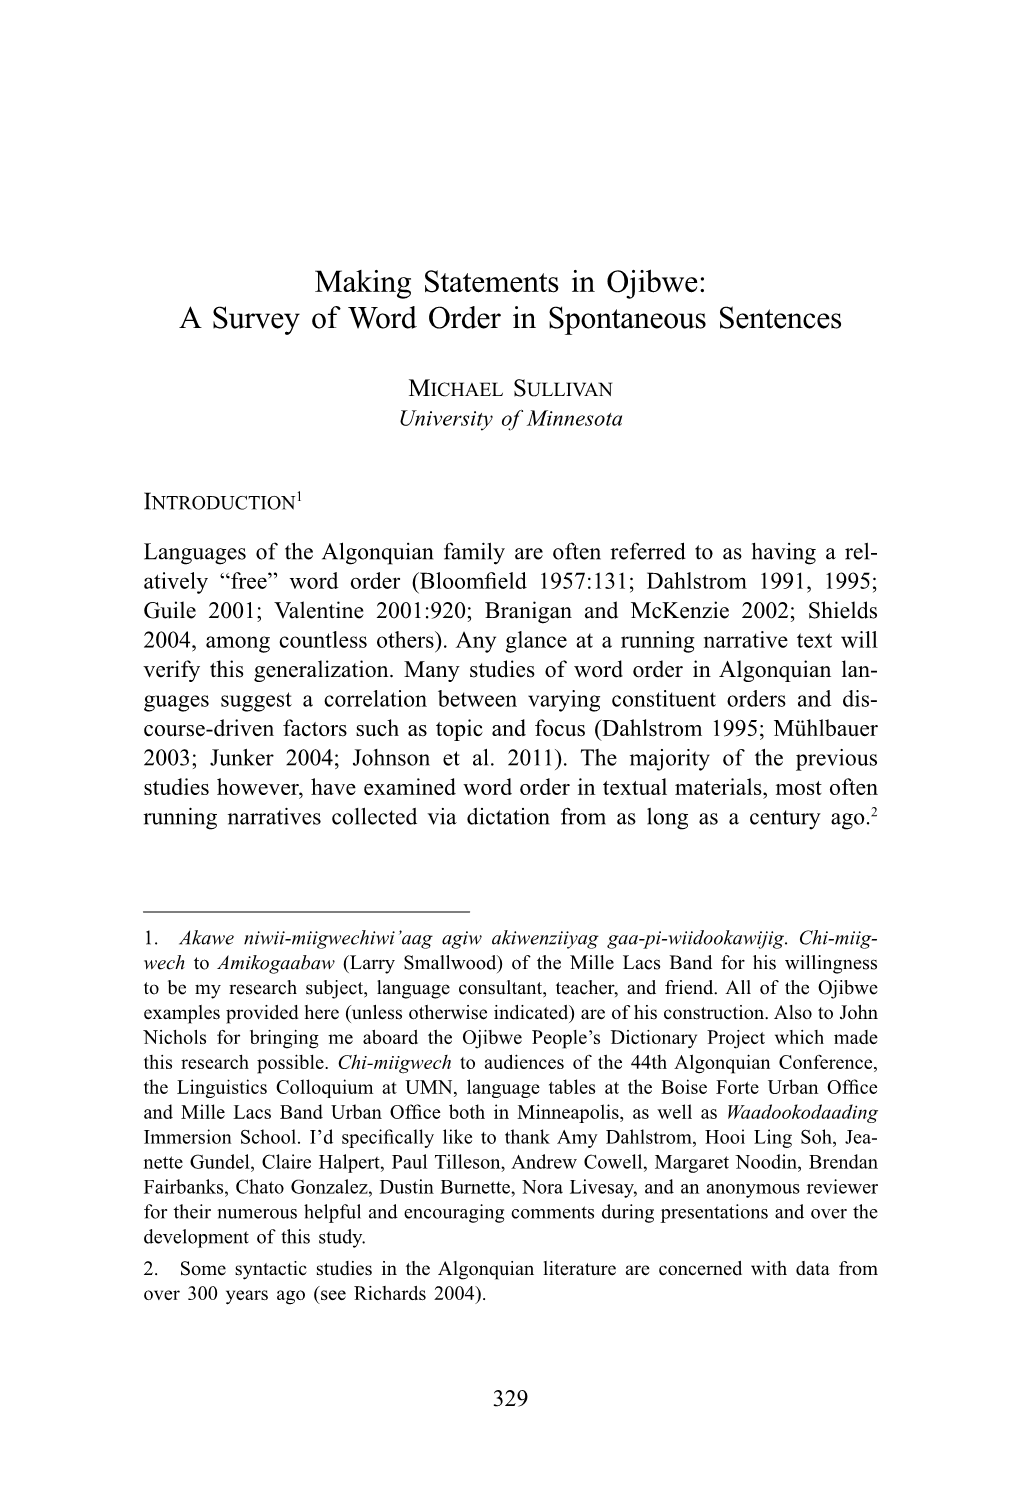 Making Statements in Ojibwe: a Survey of Word Order in Spontaneous Sentences